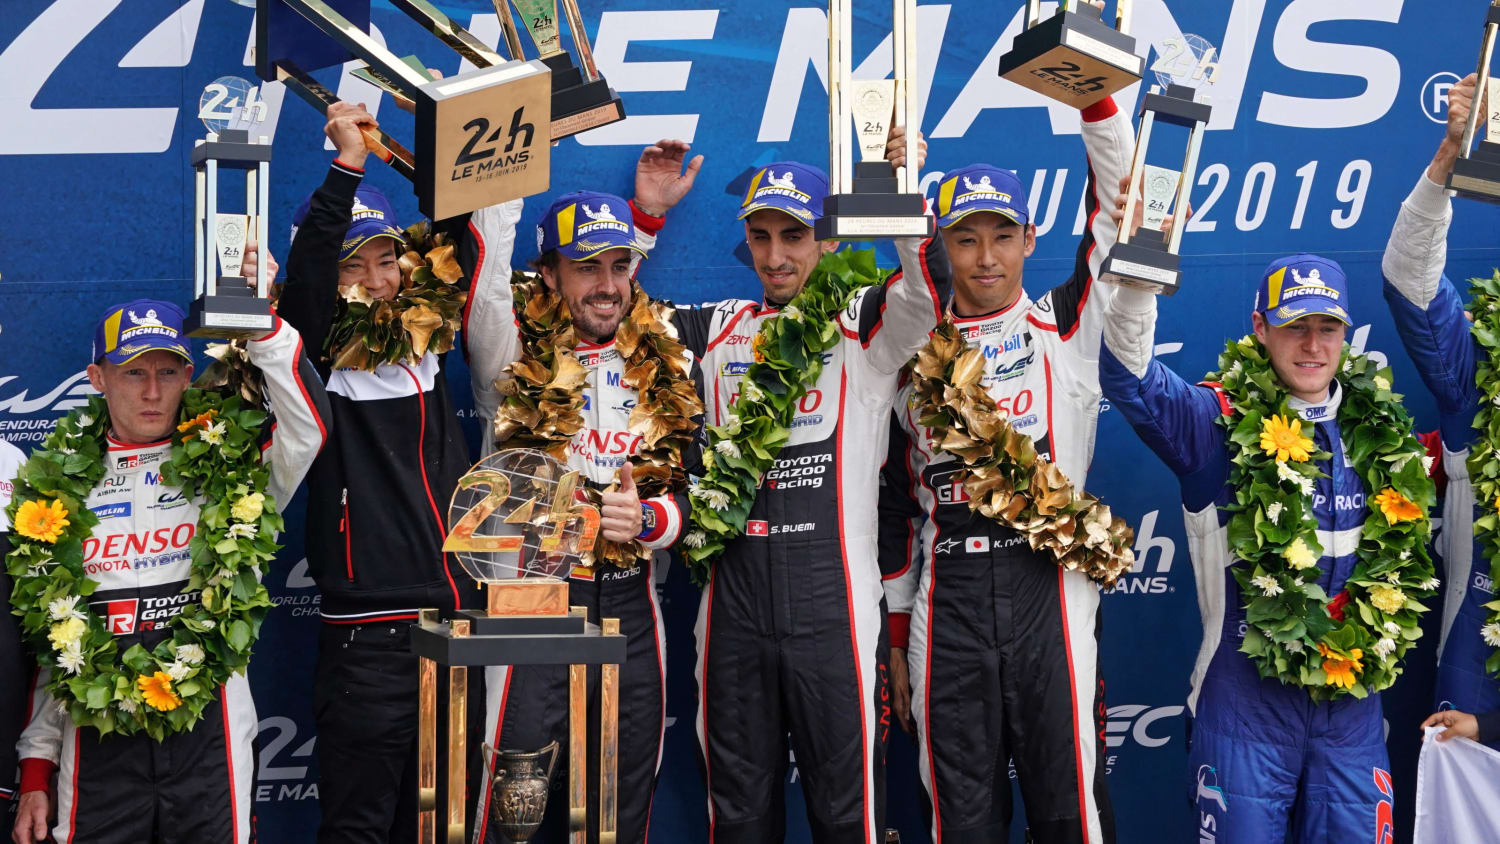 Fernando Alonso leads Toyota to 1-2 finish at 24 Hours Le Mans sports car race